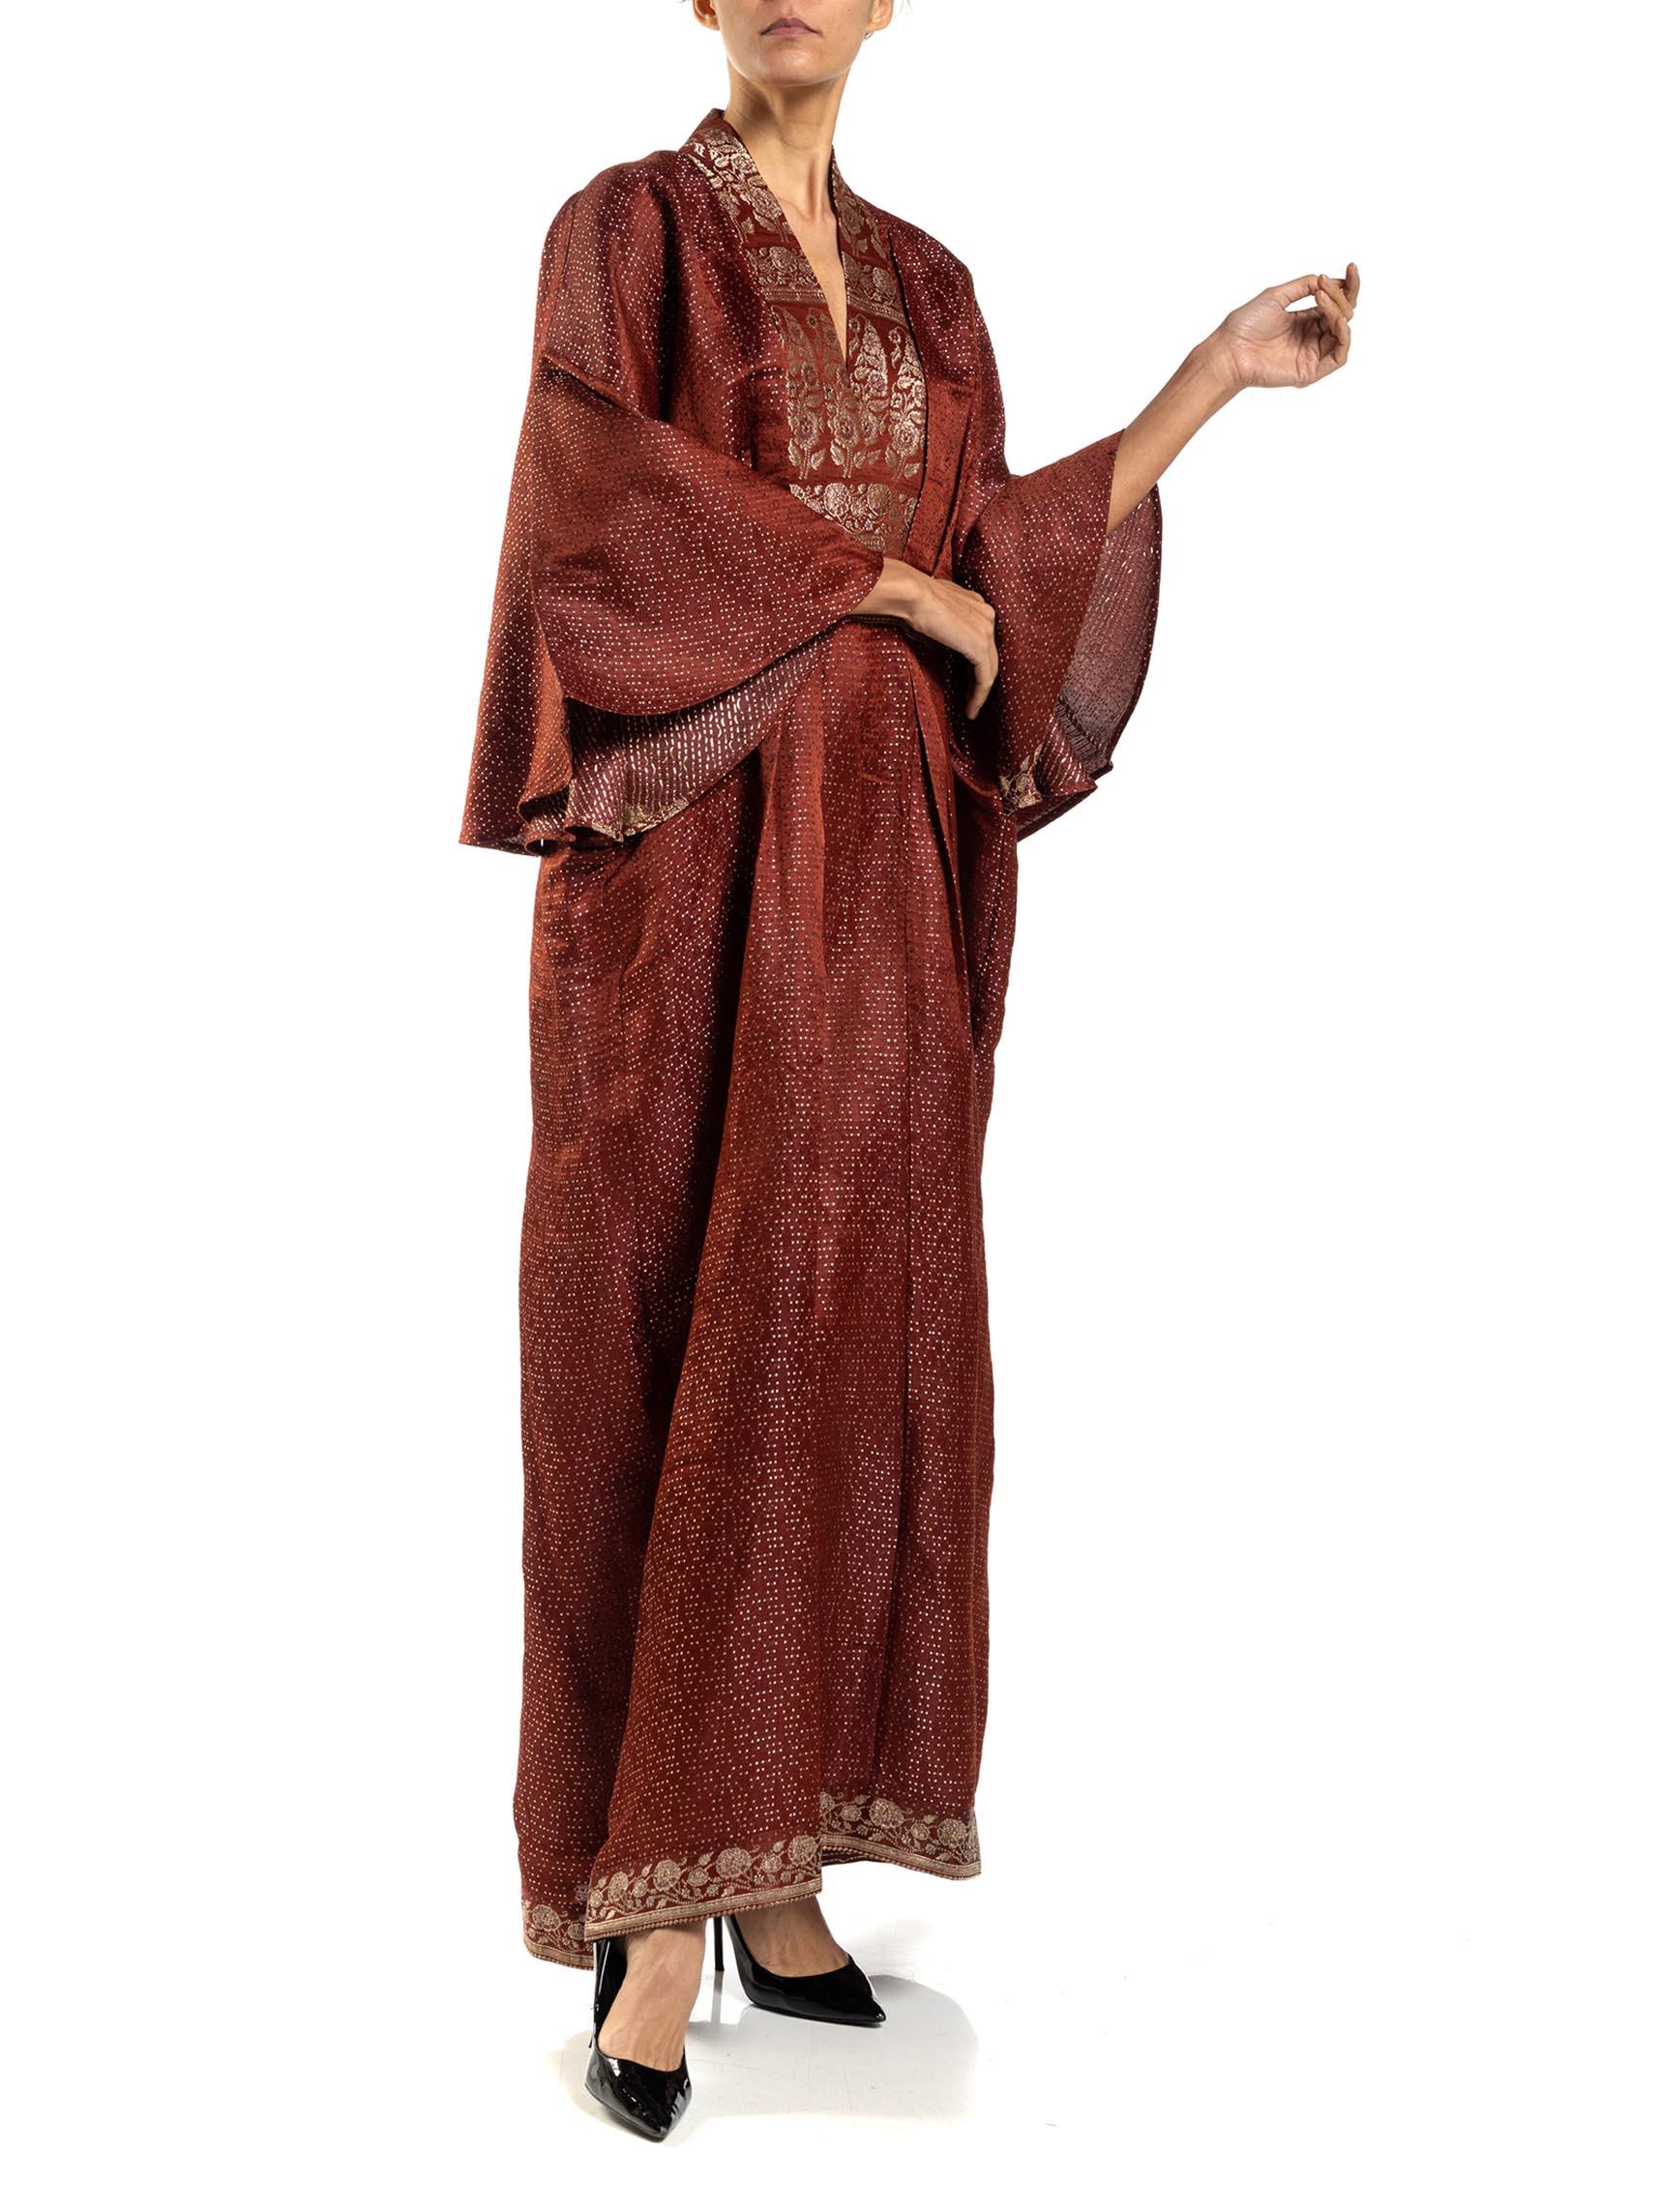 MORPHEW COLLECTION Burgundy Floral Silk Checkered Kaftan Made From Vintage Sari For Sale 5